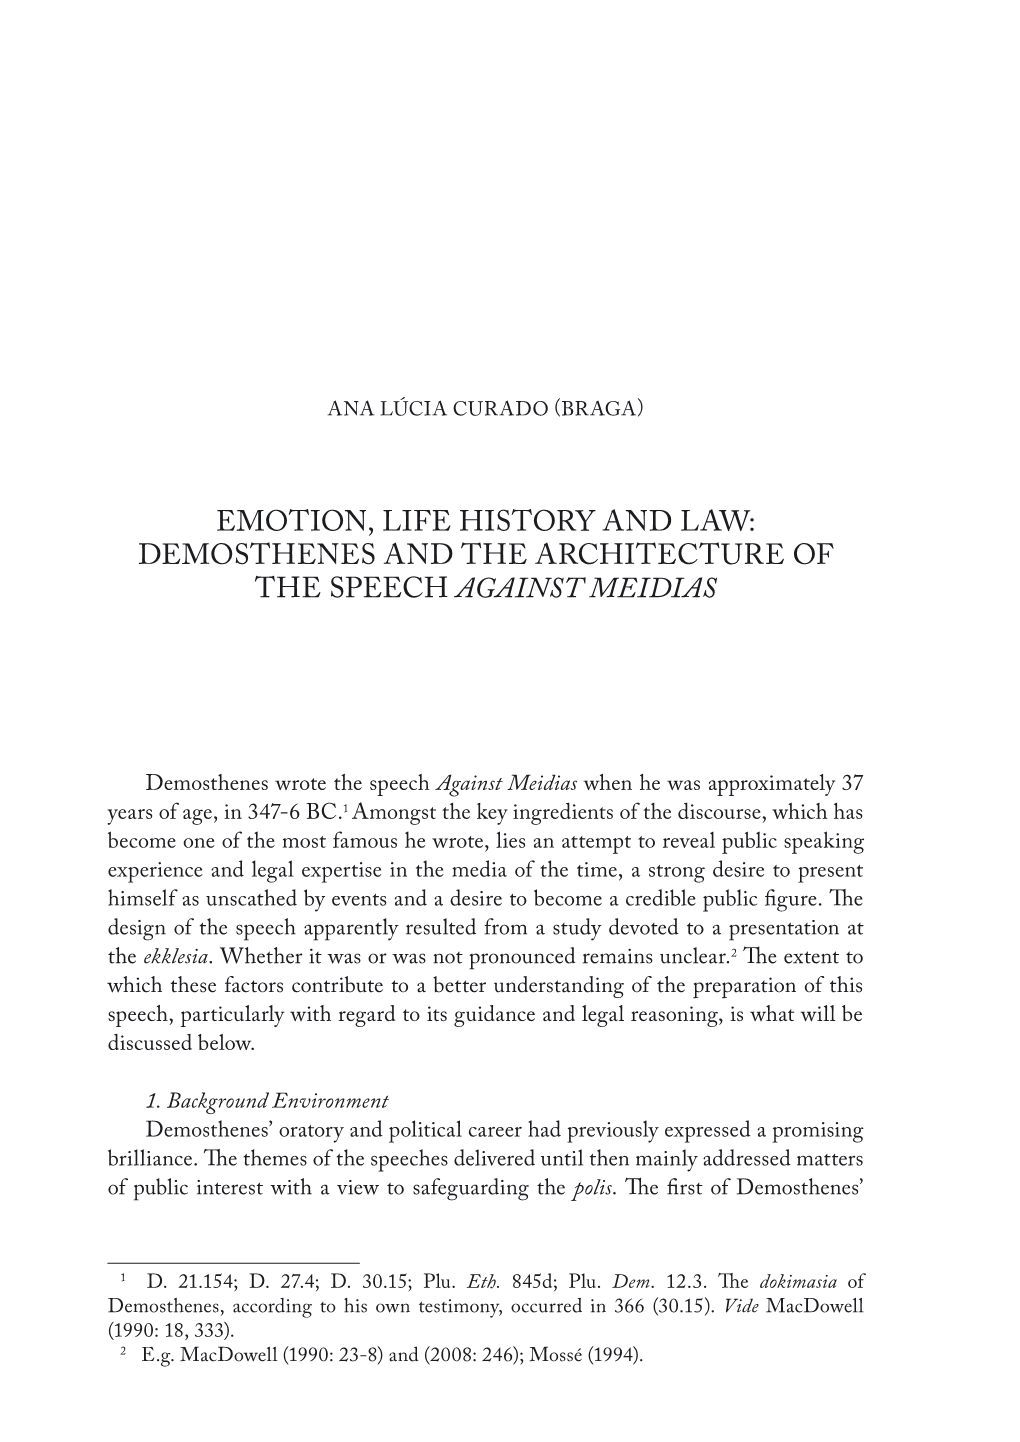 Demosthenes and the Architecture of the Speech Against Meidias